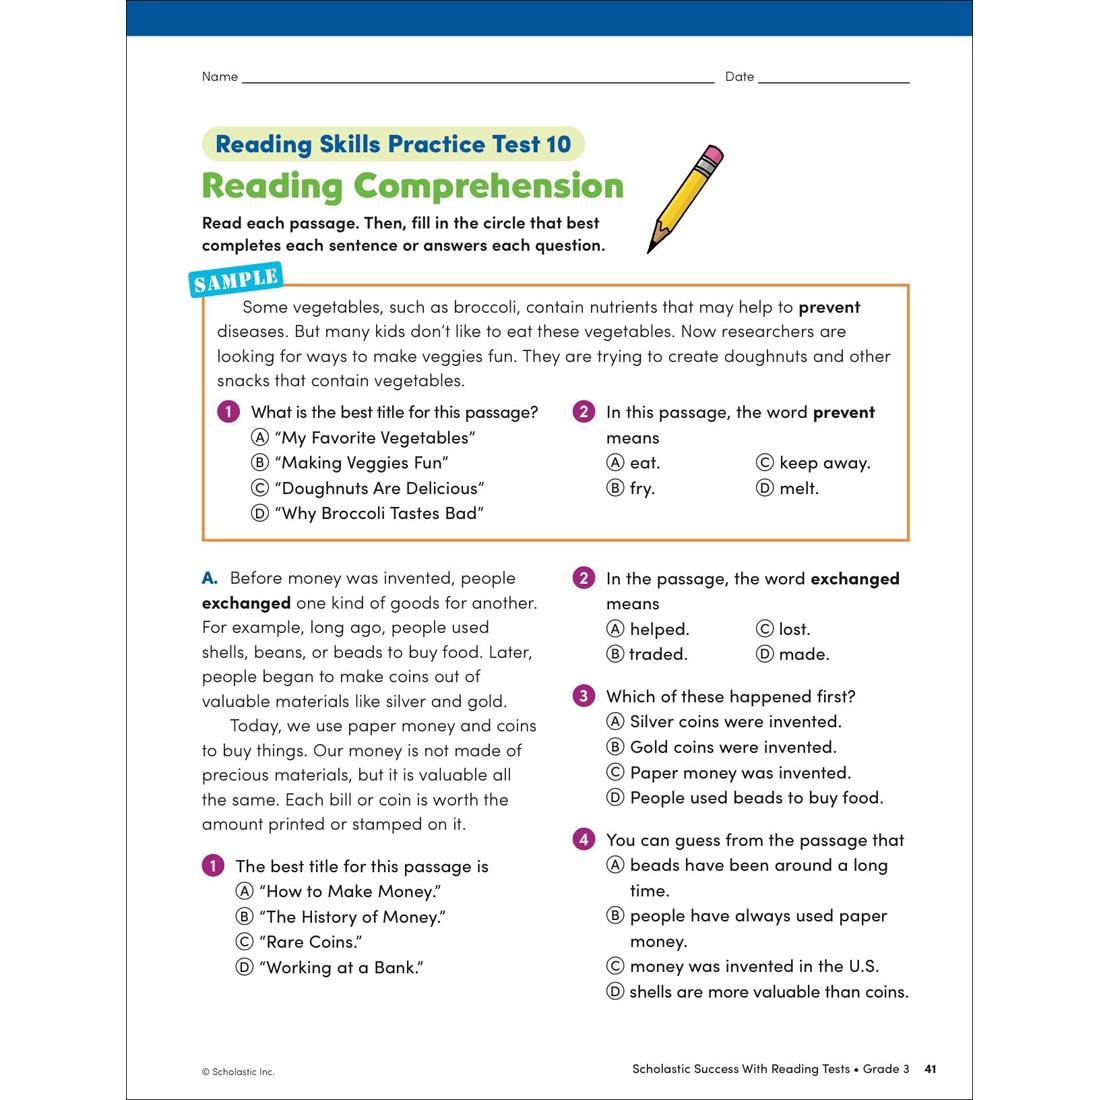 page 41 from Scholastic Success With Reading Tests Workbook Grade 3